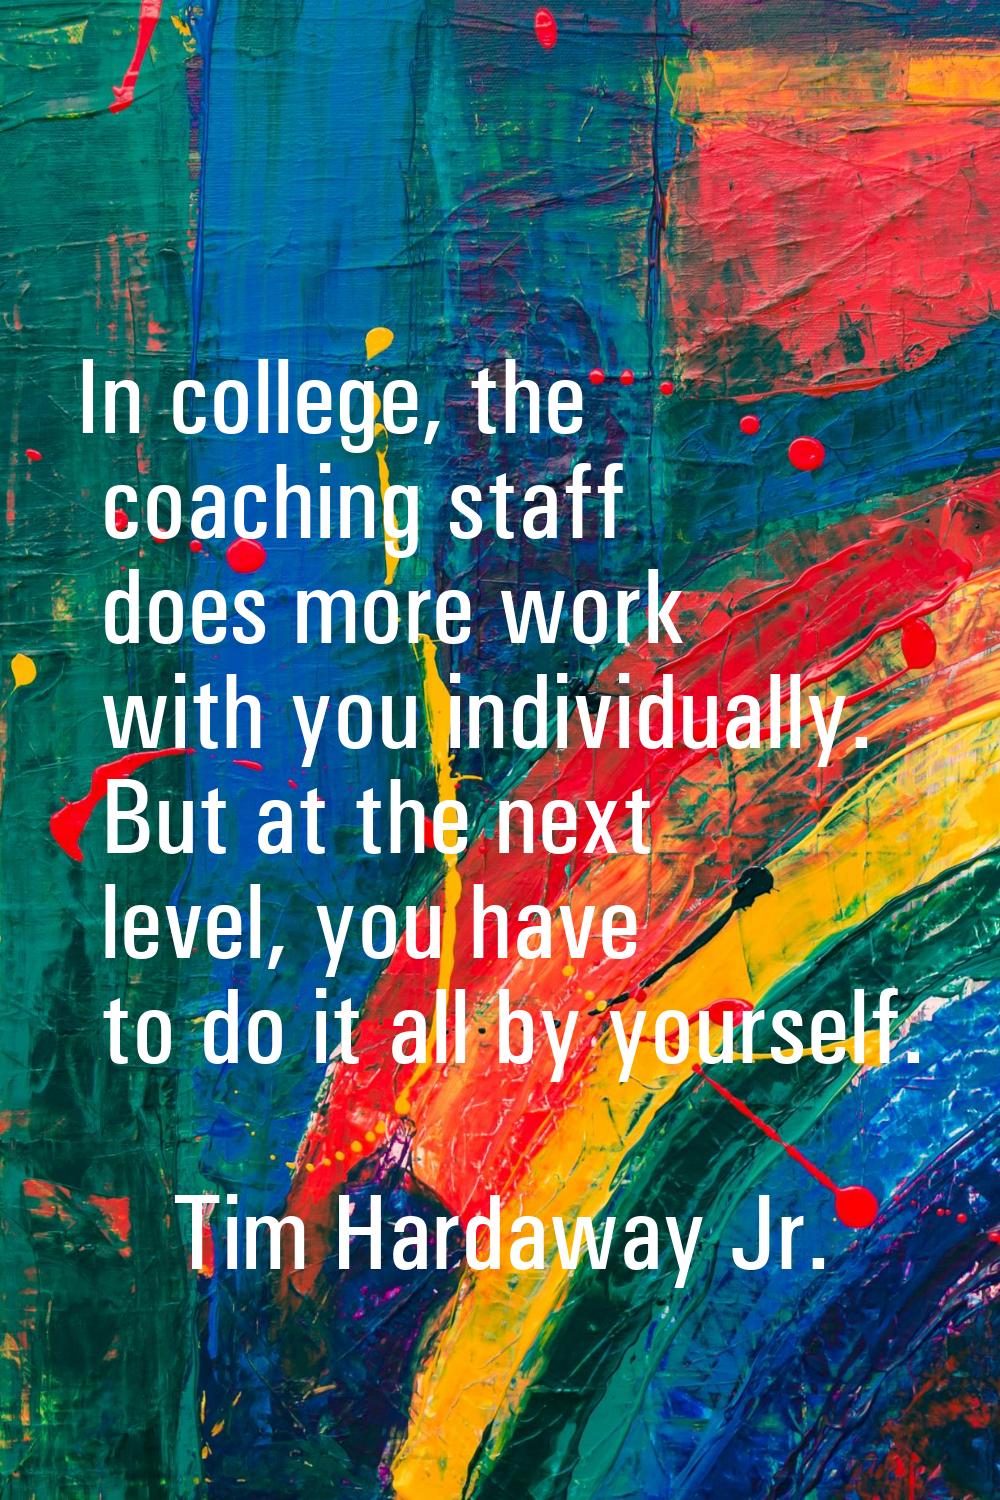 In college, the coaching staff does more work with you individually. But at the next level, you hav